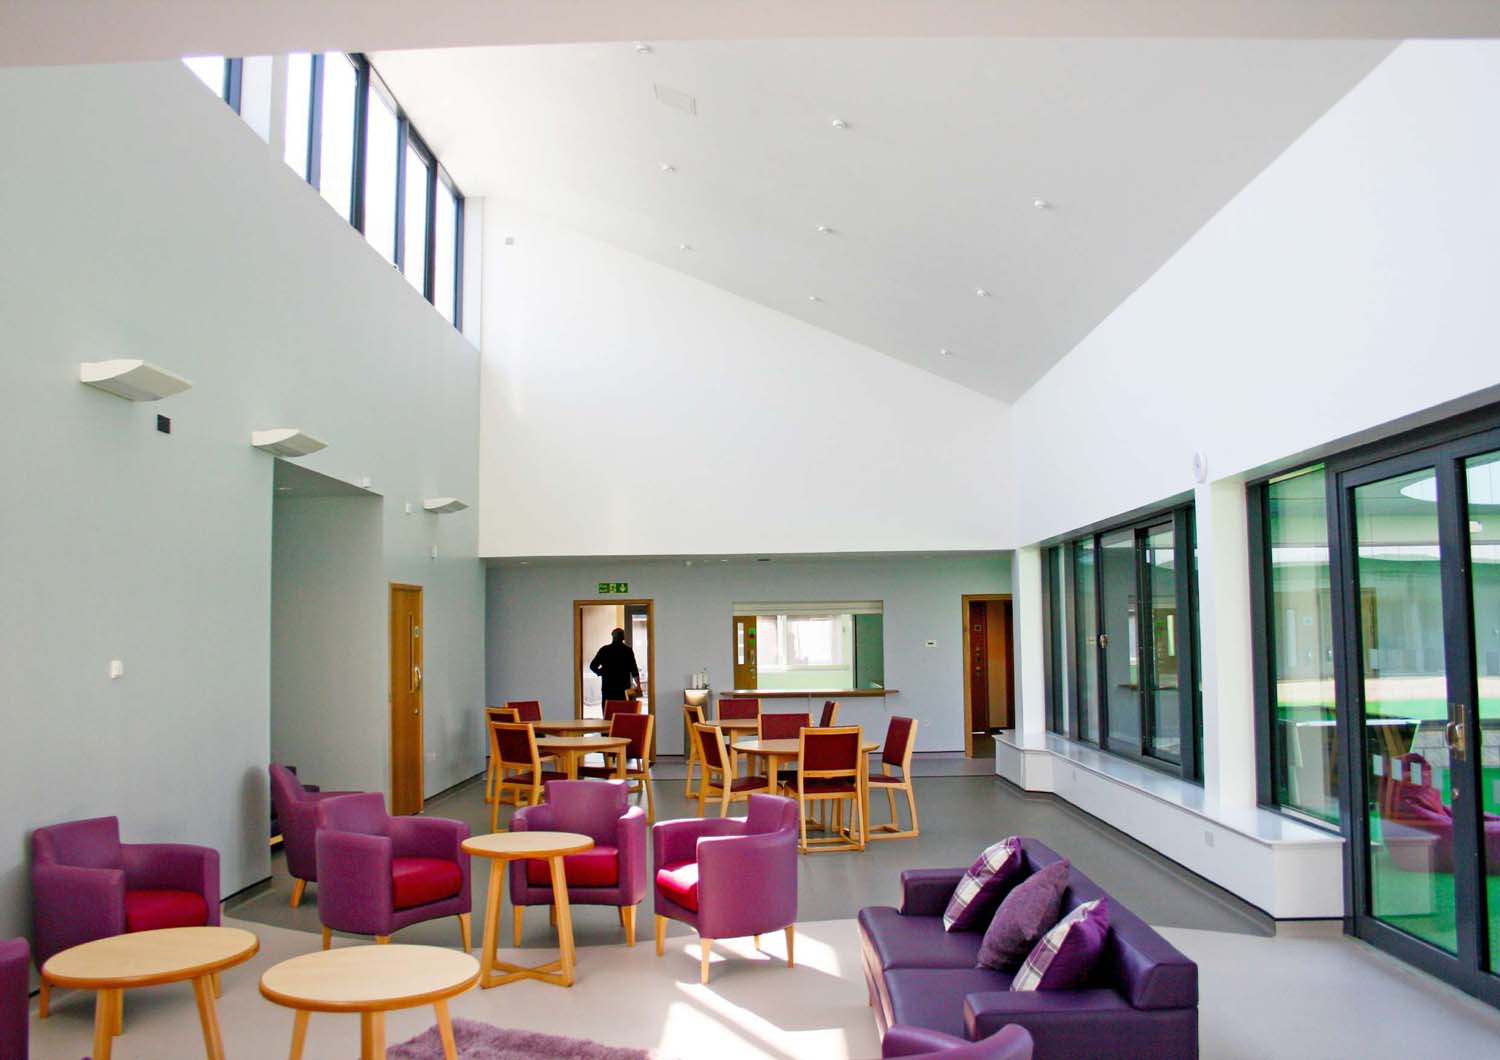 A social space with clerestory windows and a slanted roof. There is a couch and armchairs in purple hues and large windows looking into another interior space.